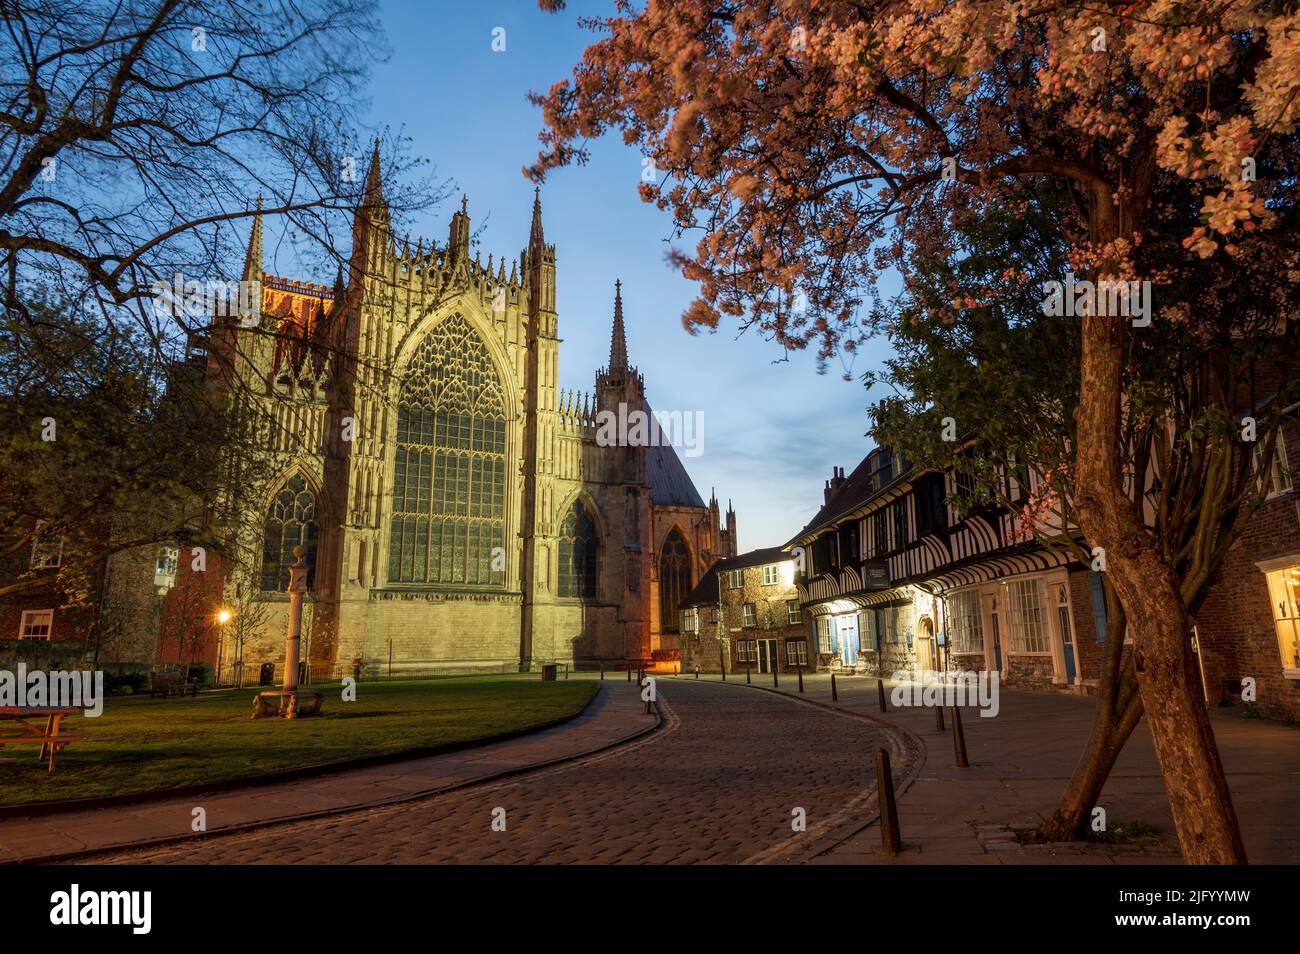 College Street with York Minster at night, City of York, Yorkshire, England, United Kingdom, Europe Stock Photo